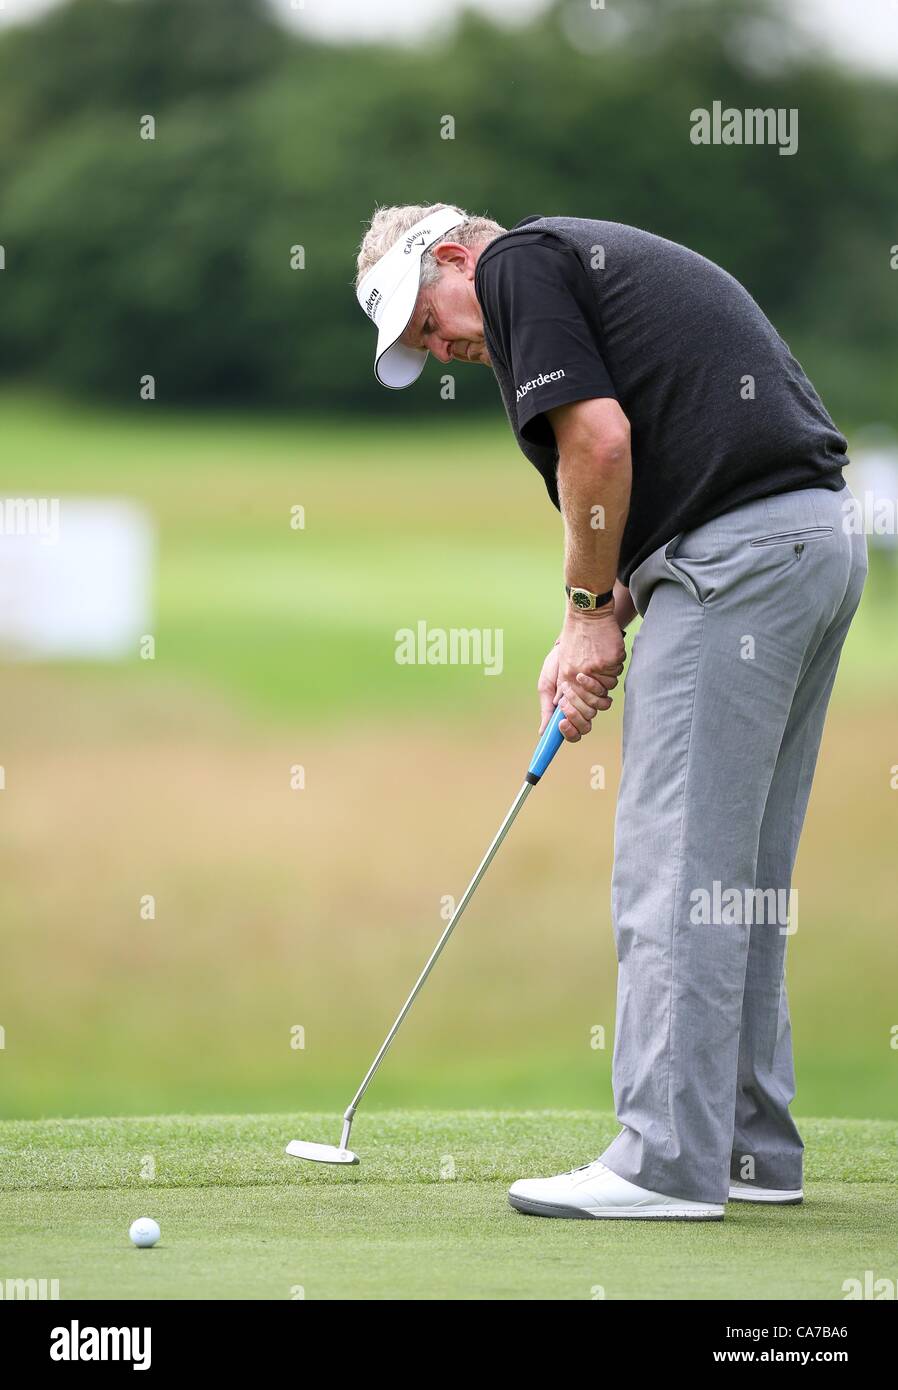 21.06.2012. Pulheim, Cologne, Germany. Scottish golfer Colin Montgomerie  putting during the International open at golf club Gut Laerchenhof in  Pulheim near Cologne, Germany, 21 June 2012. World class golfers of the  European